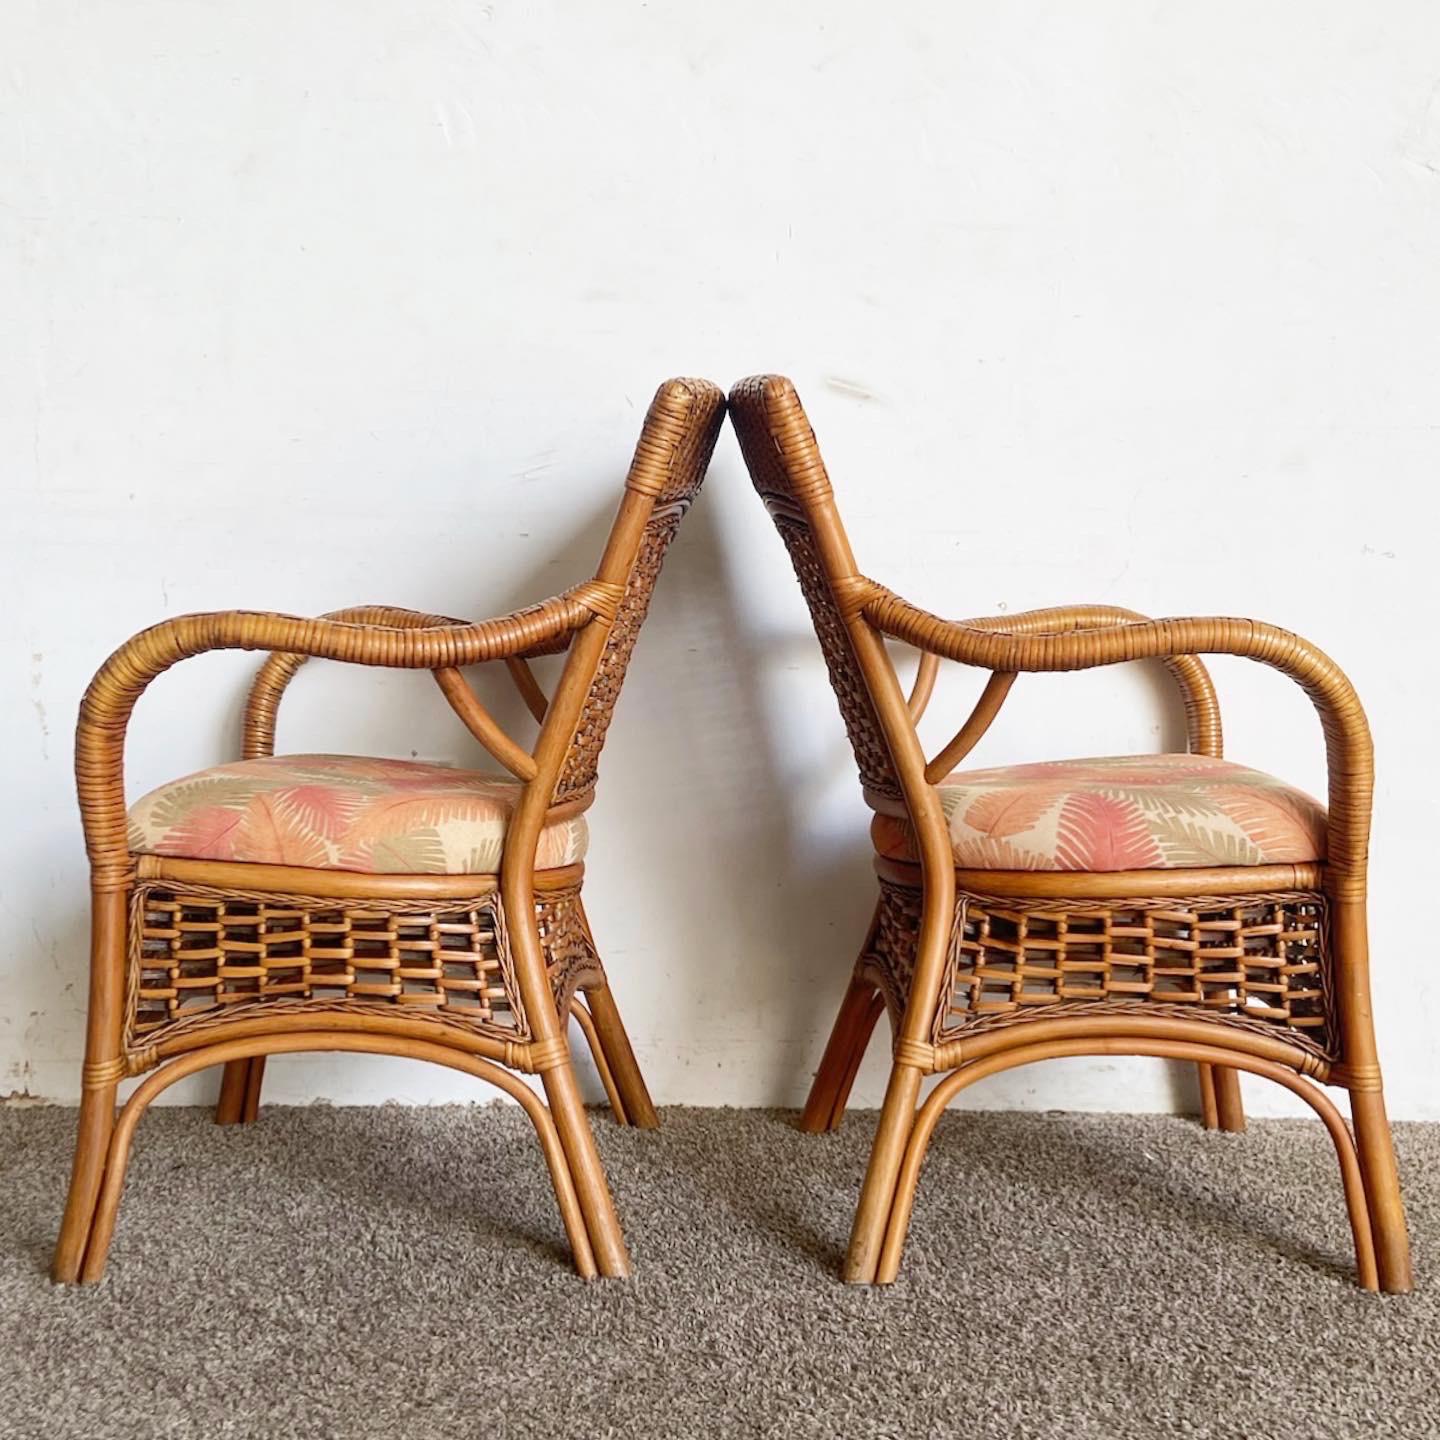 Boho Chic Bamboo Rattan and Wicker Dining Arm Chairs In Good Condition For Sale In Delray Beach, FL